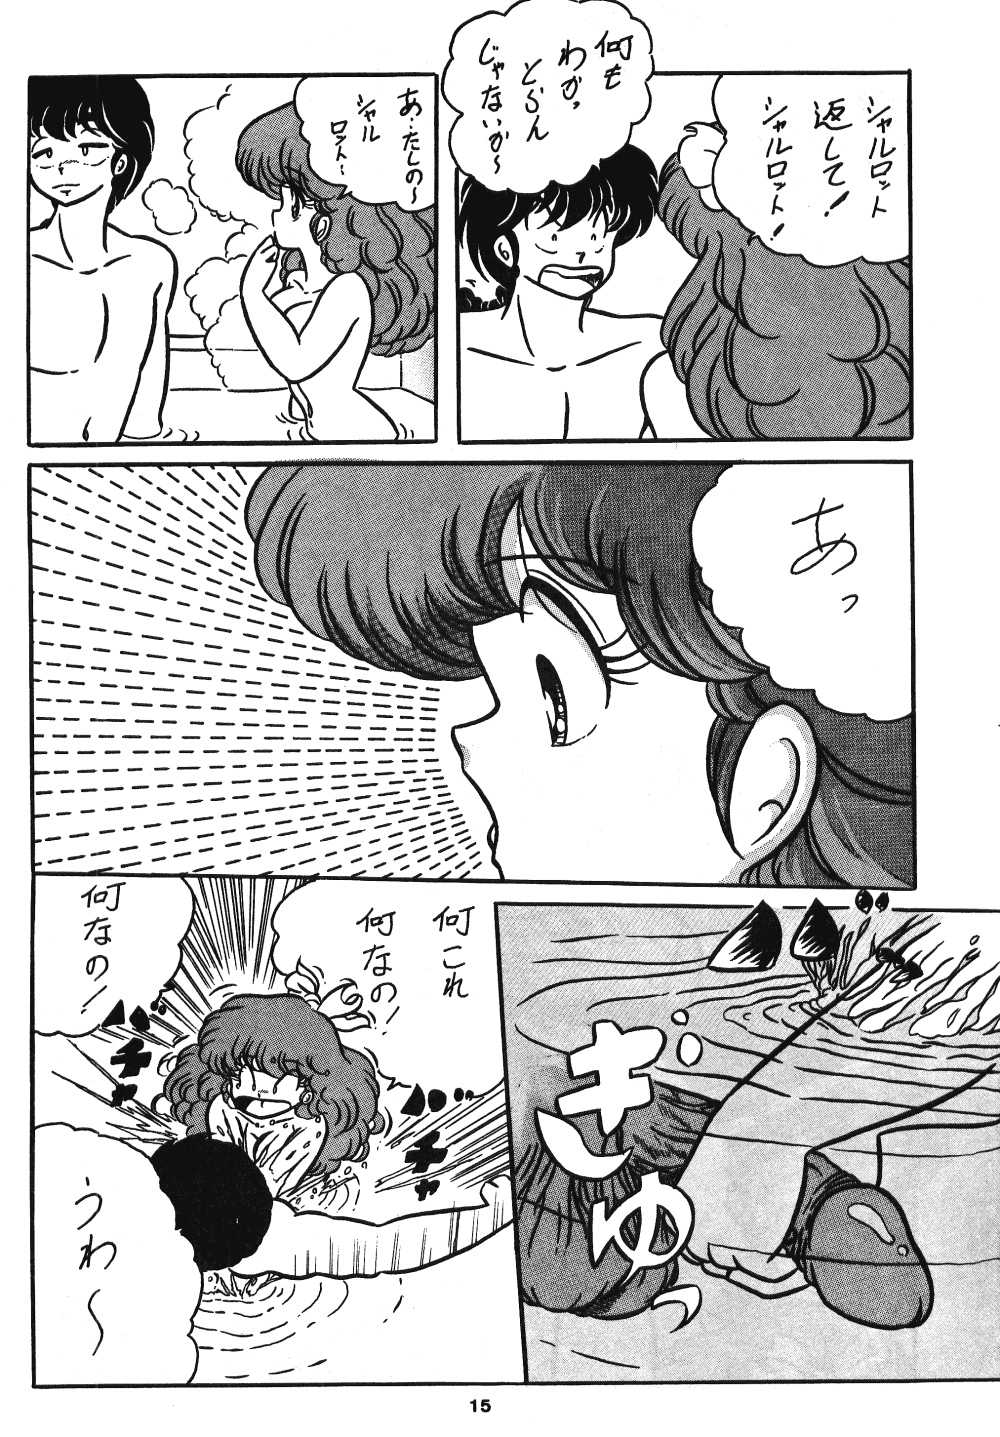 [C-COMPANY] C-COMPANY SPECIAL STAGE 2 (Ranma 1/2) page 16 full